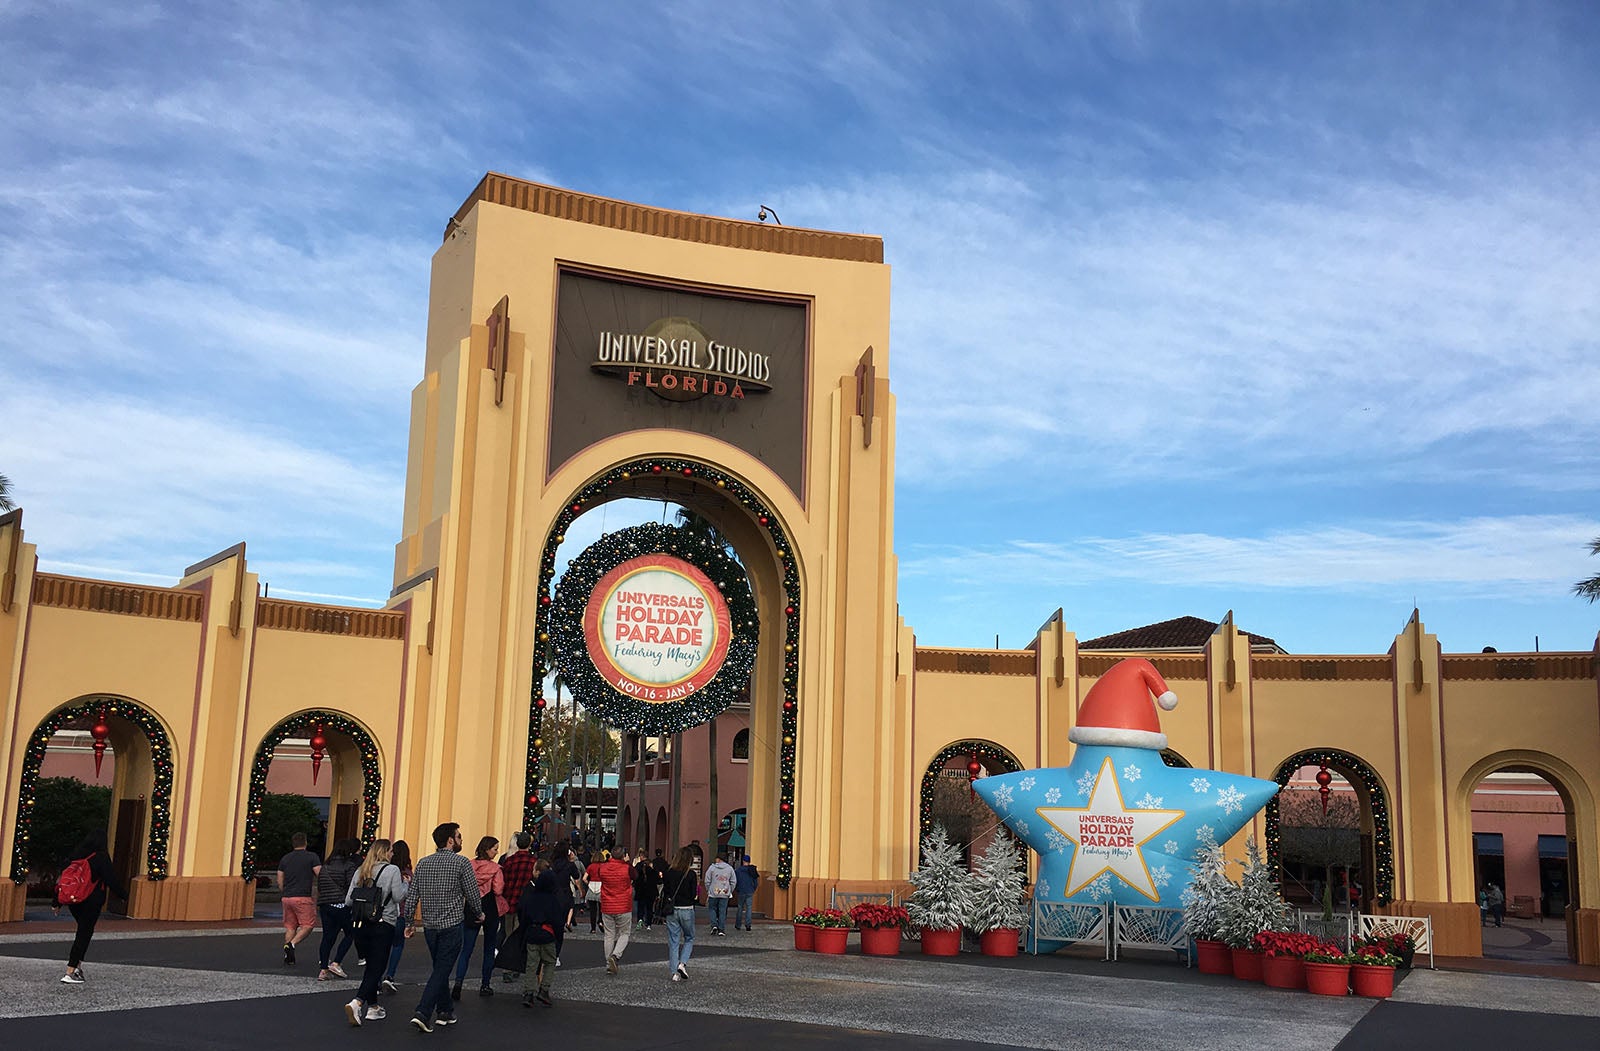 Internet Access at Universal Orlando - Complete Guide